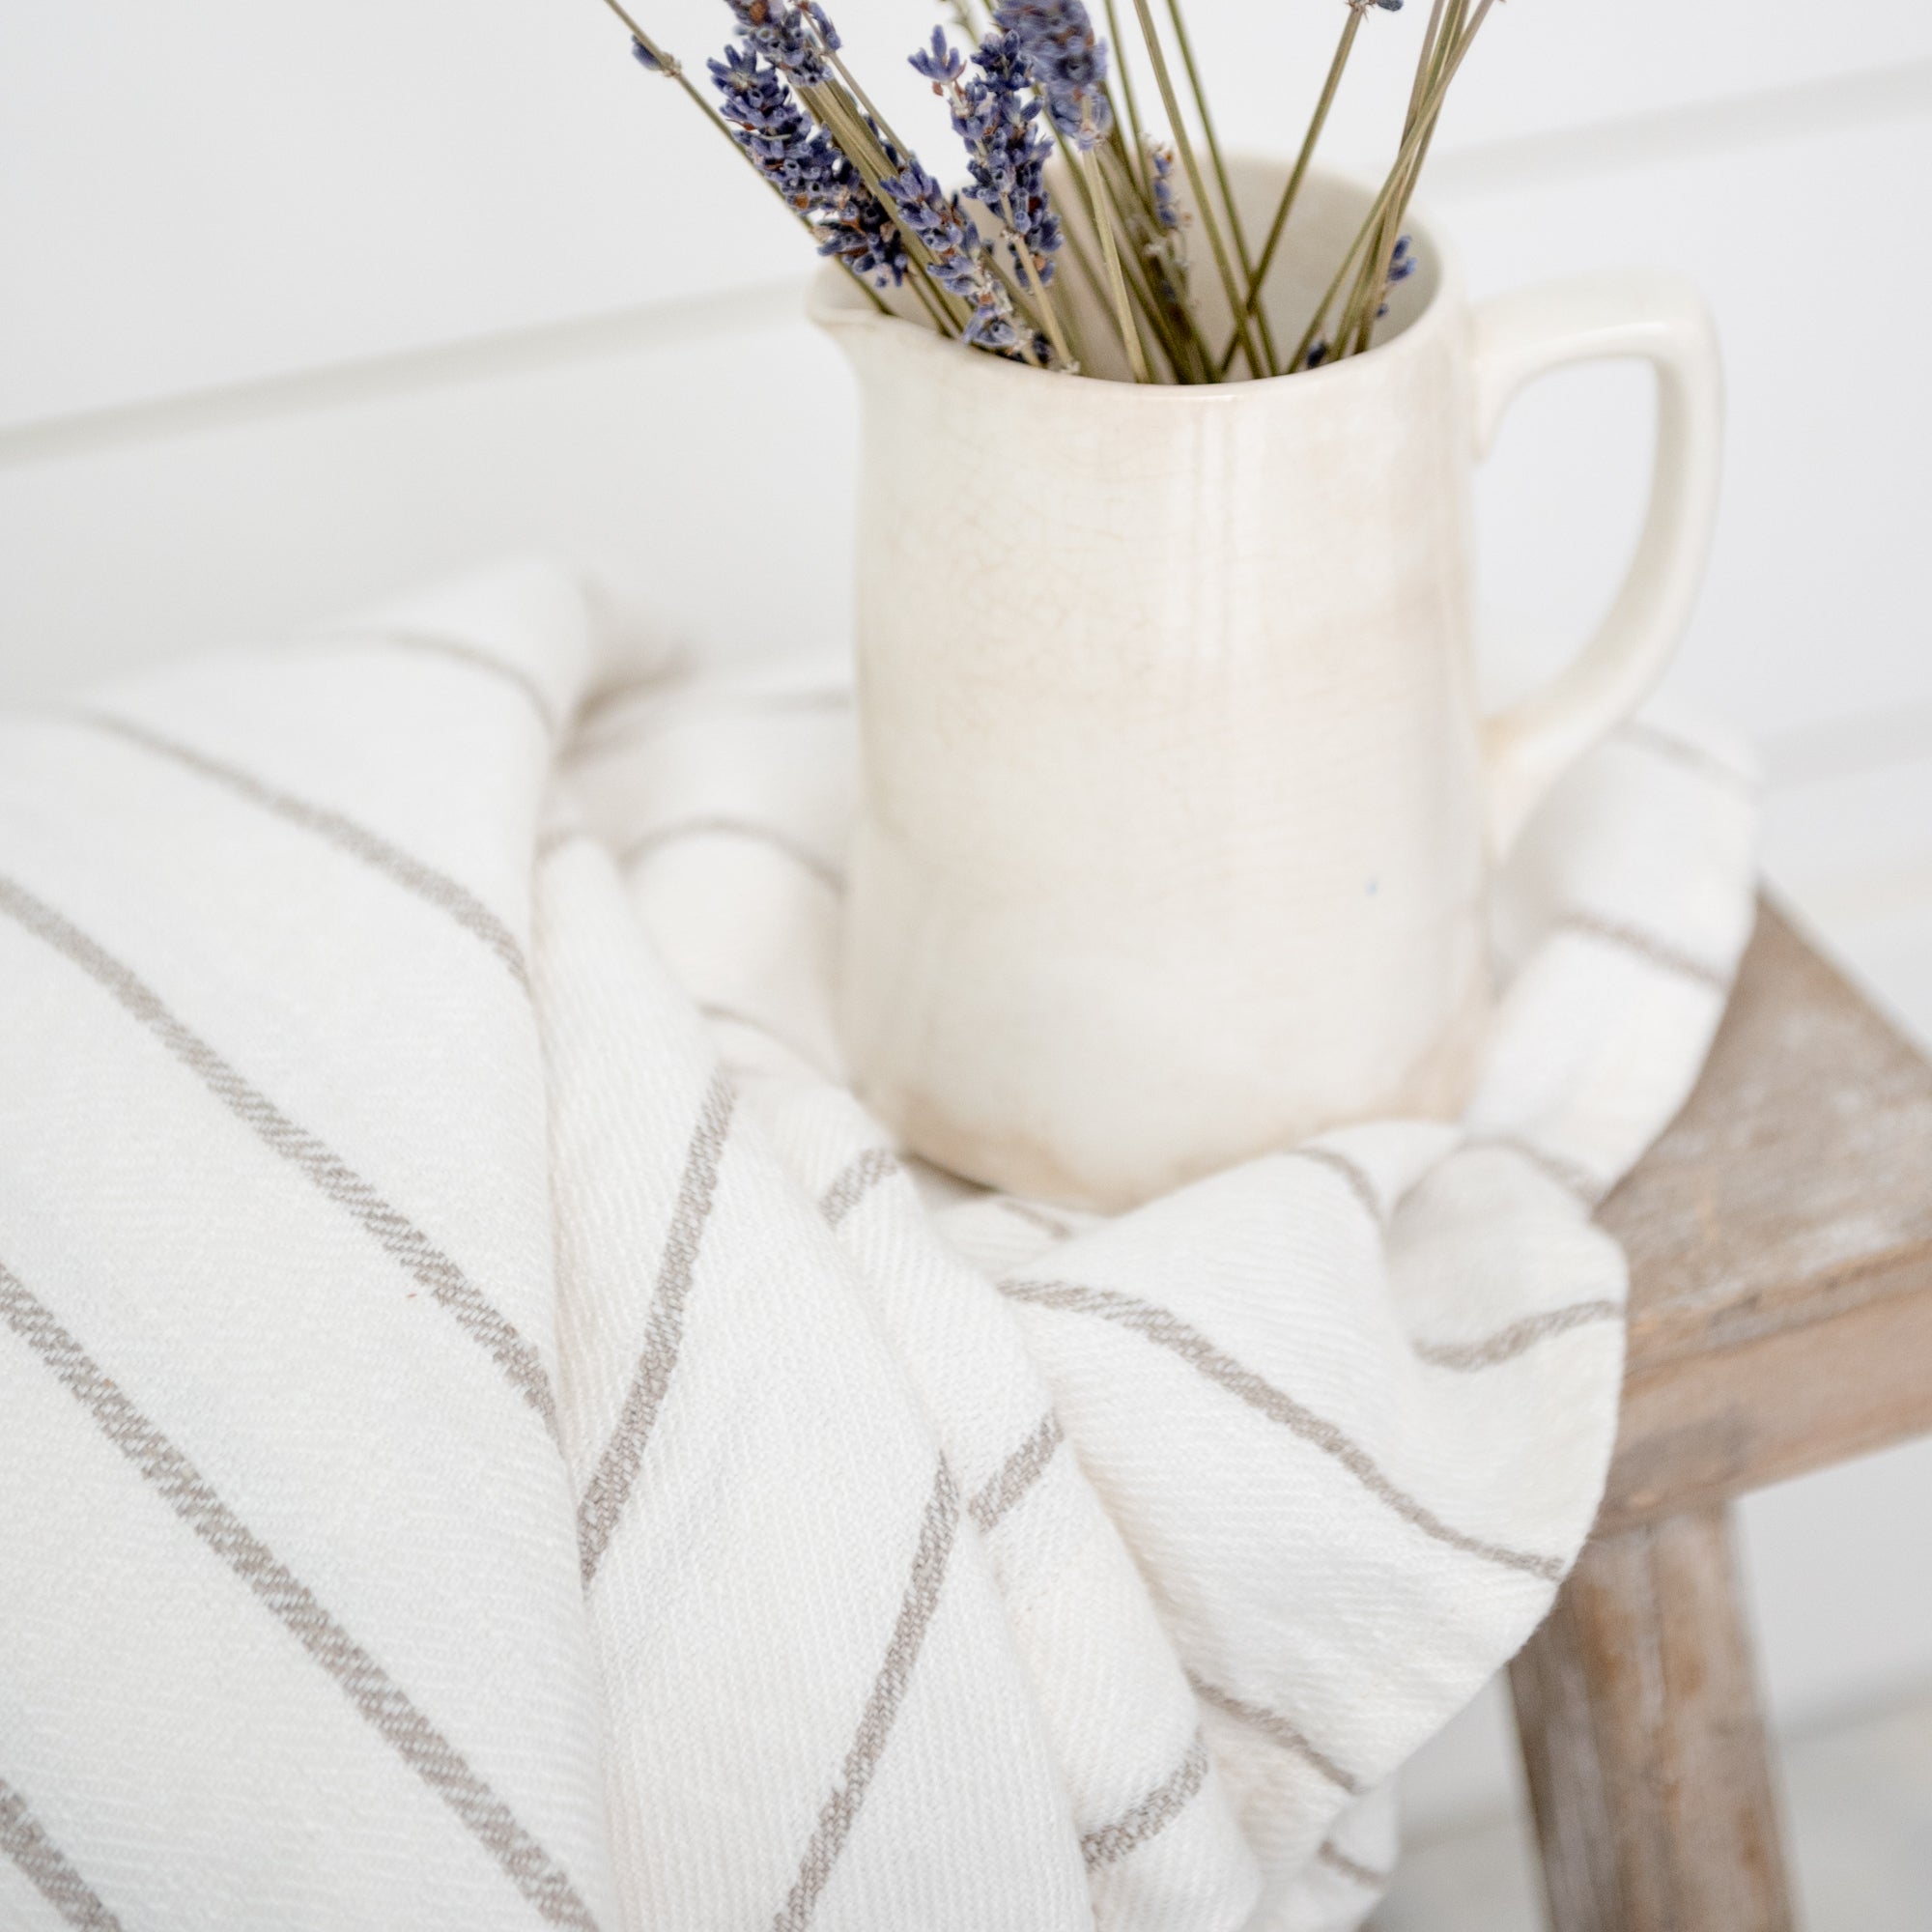 Striped Forte Towel shown on bench under white ceramic pot with lavender stems in.